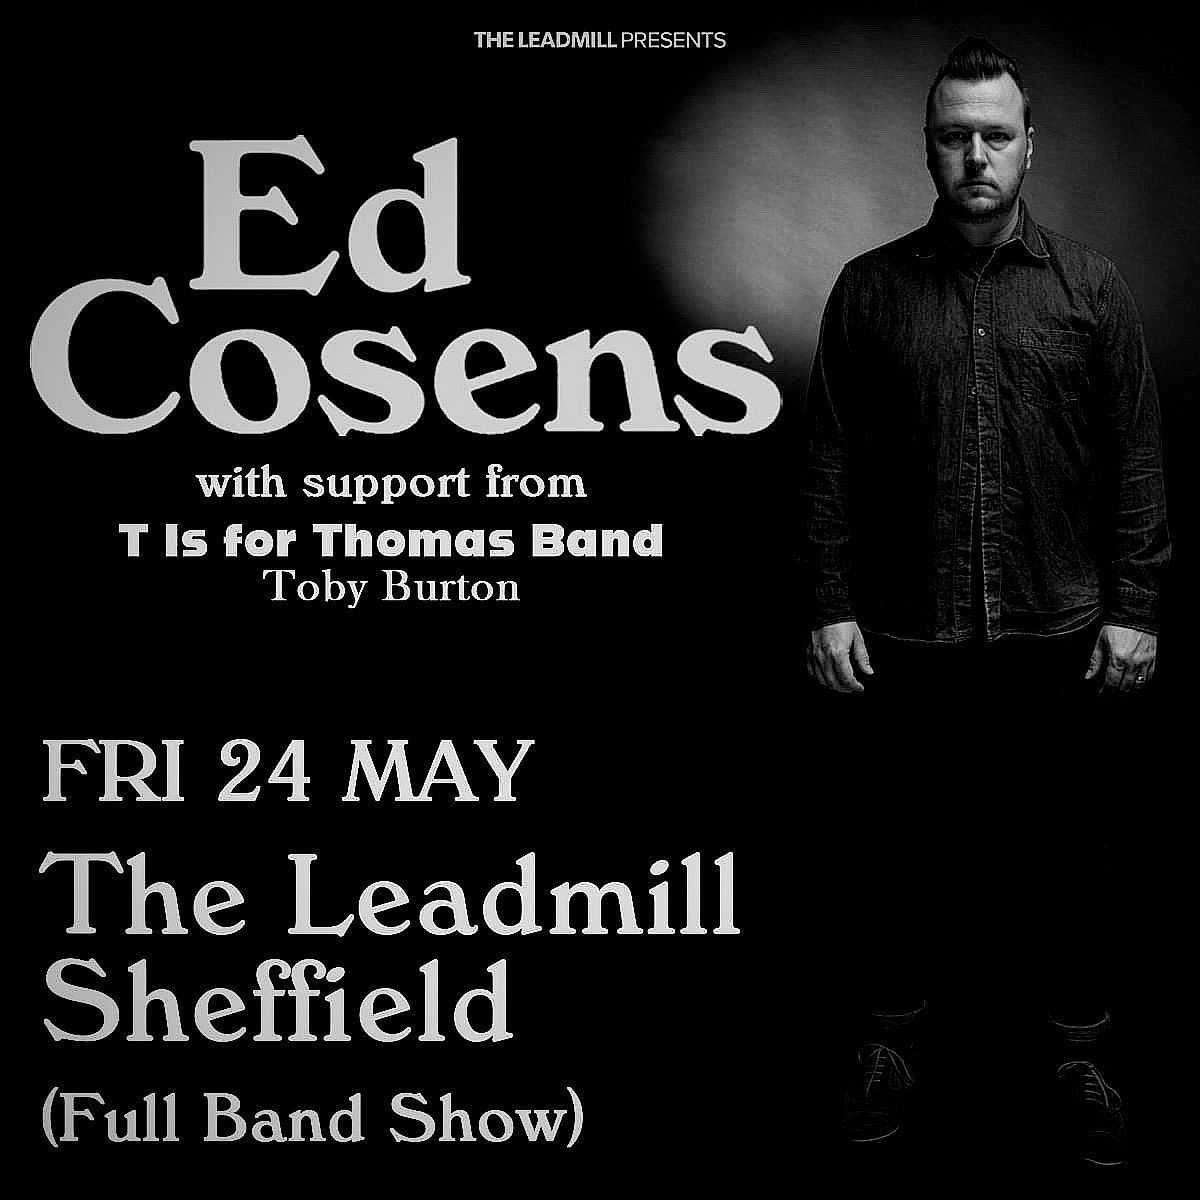 Tickets for our 2nd live outing are available now: leadmill.co.uk/event/ed-cosen… On Friday 24 May we will play a stripped back set in support of our good friend @edcosens - get yer sen a ticket and get down the @theleadmill early for what will be a night to remember…